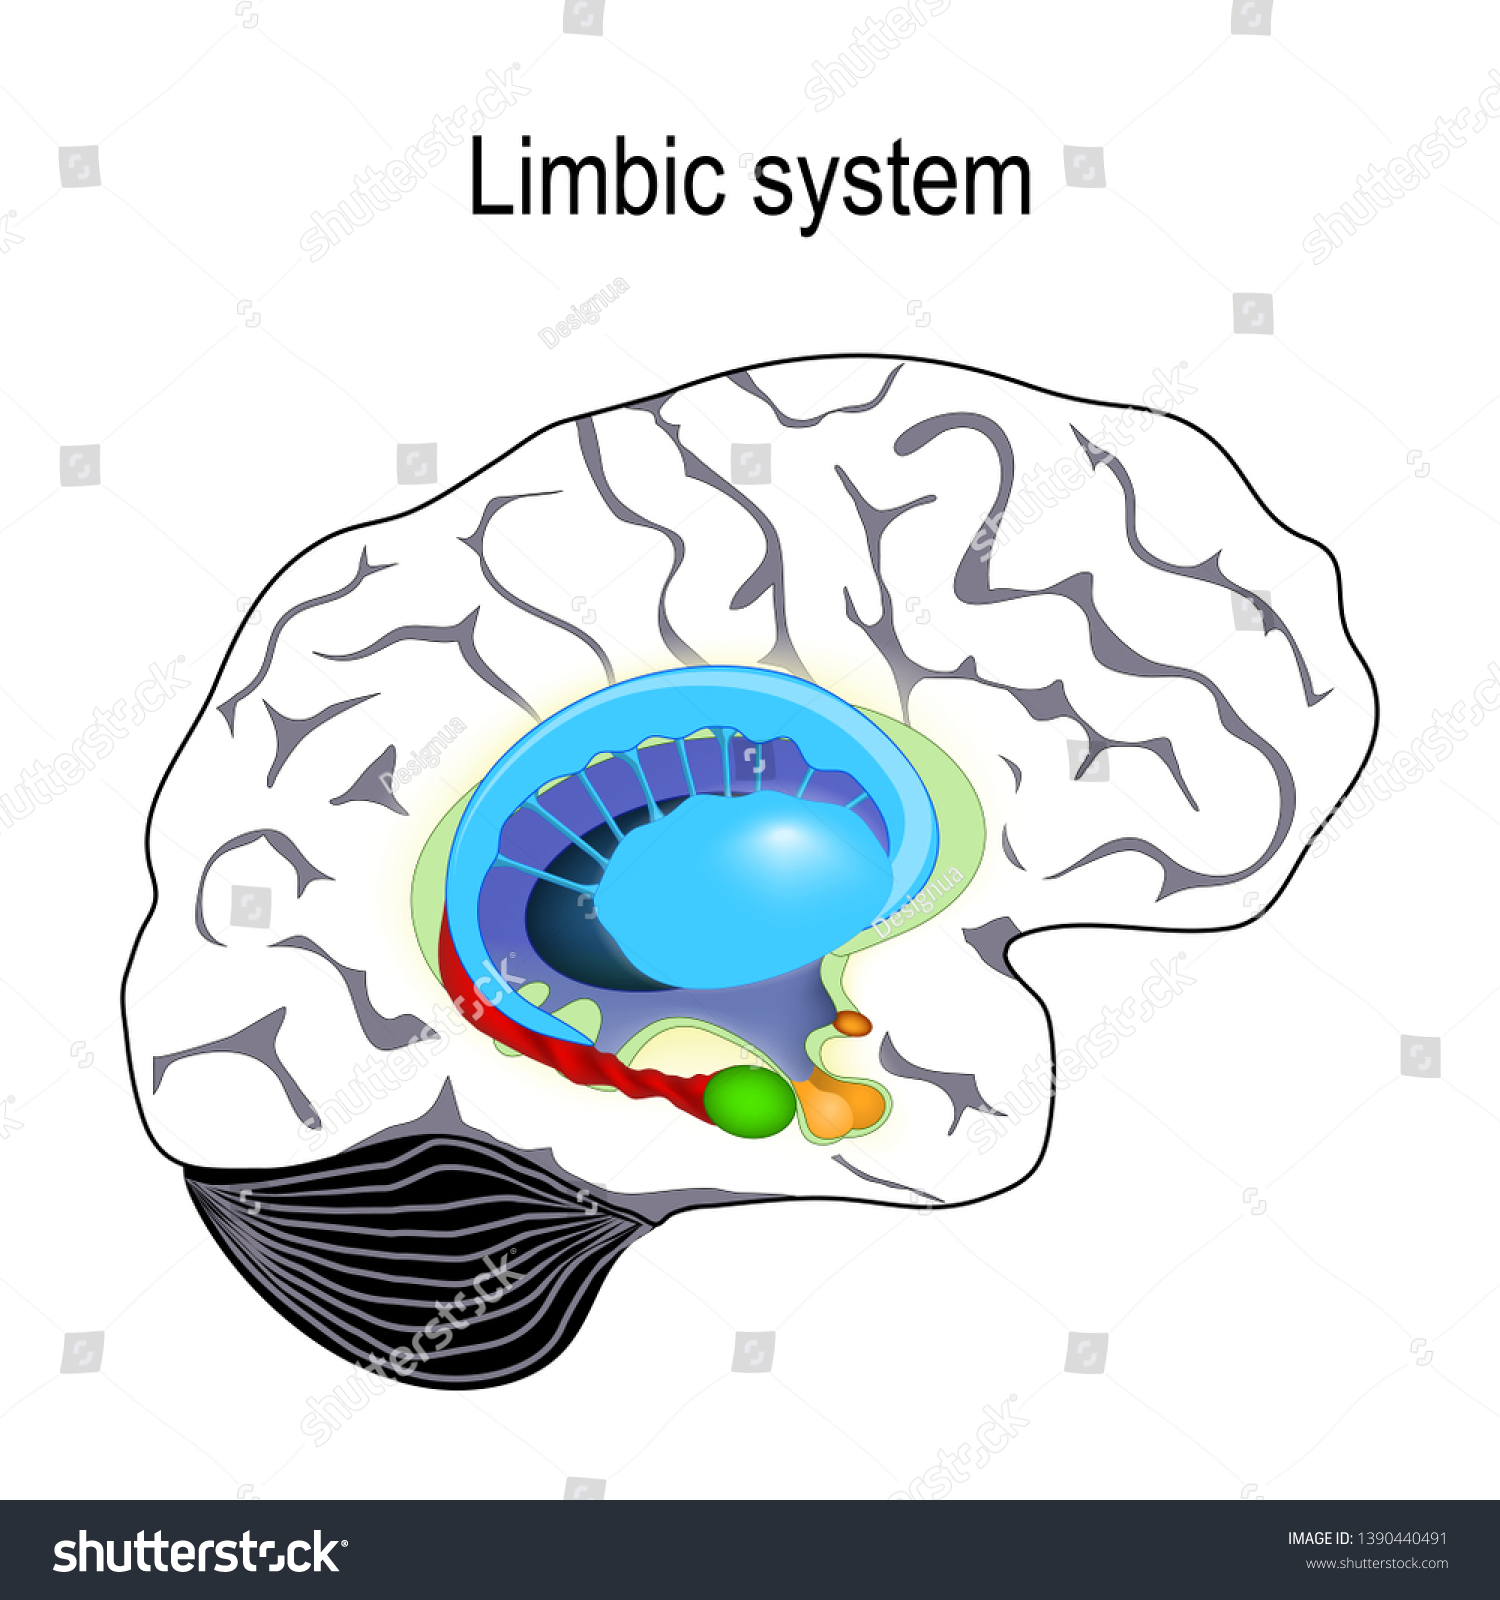 SVG of limbic system. Cross section of the human brain. Anatomical components of limbic system: Mammillary body, basal ganglia, pituitary gland, amygdala, hippocampus, thalamus, and cingulate gyrus svg